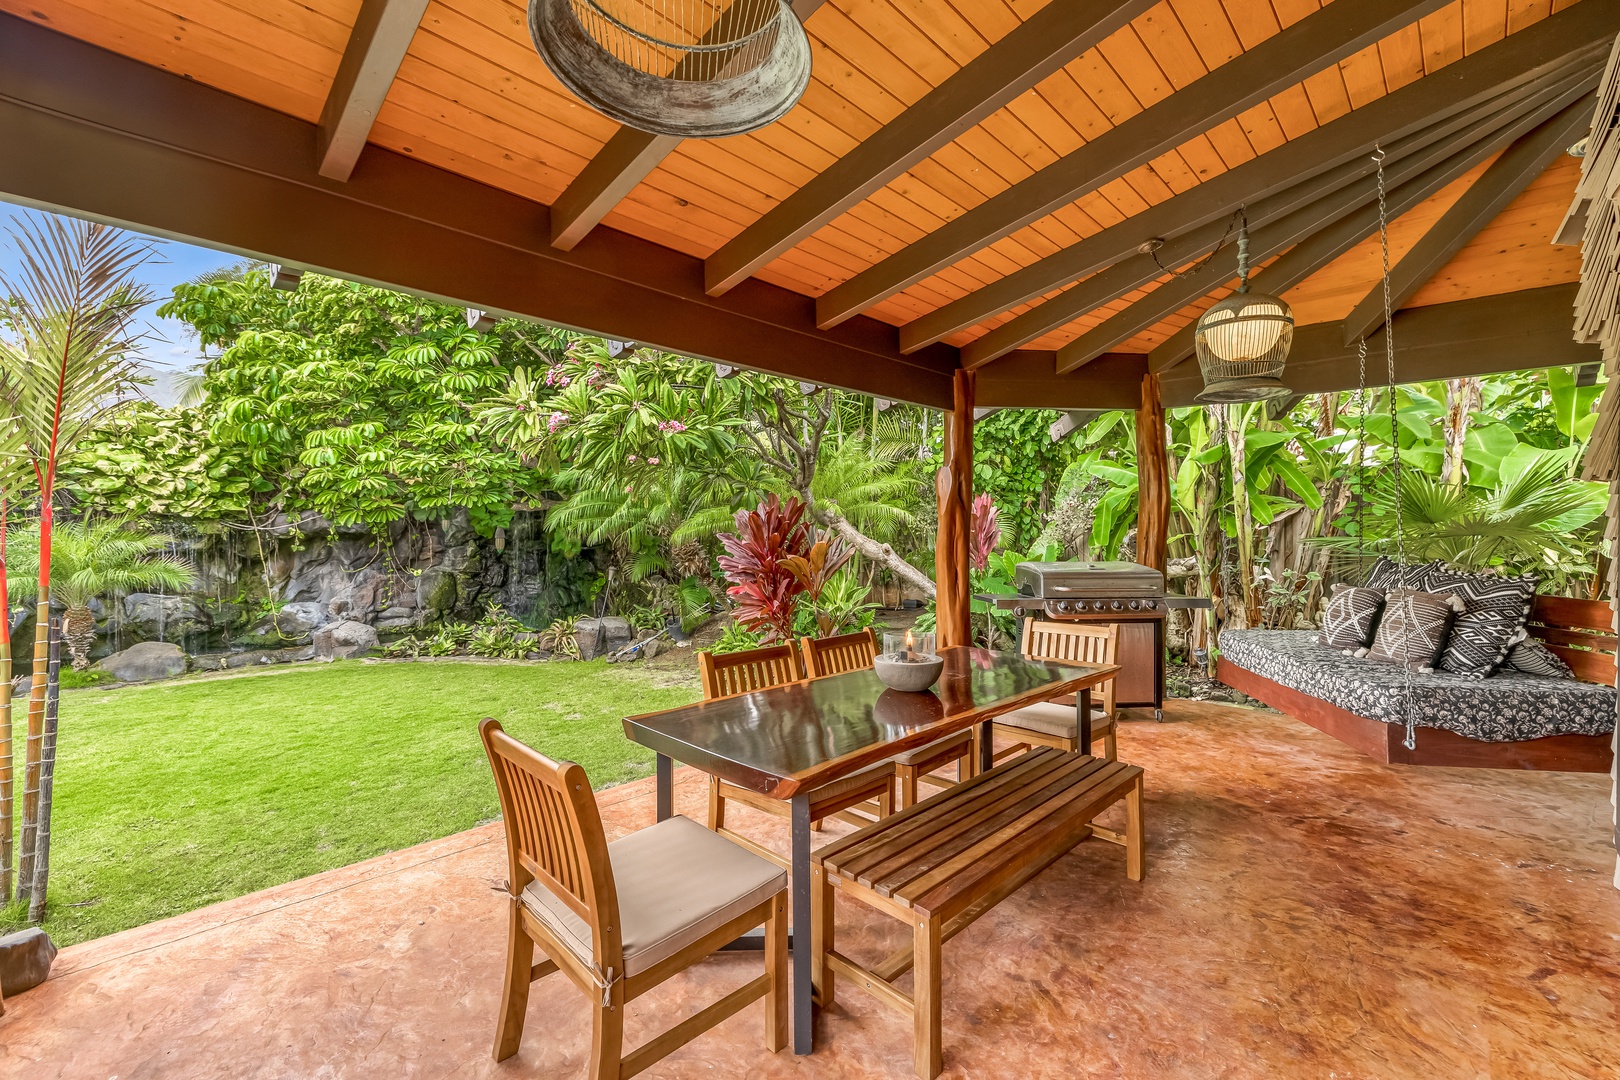 Waimanalo Vacation Rentals, Hawaii Hobbit House - Covered lanai has outdoor table and seating for 6 with two chairs to be added for 8